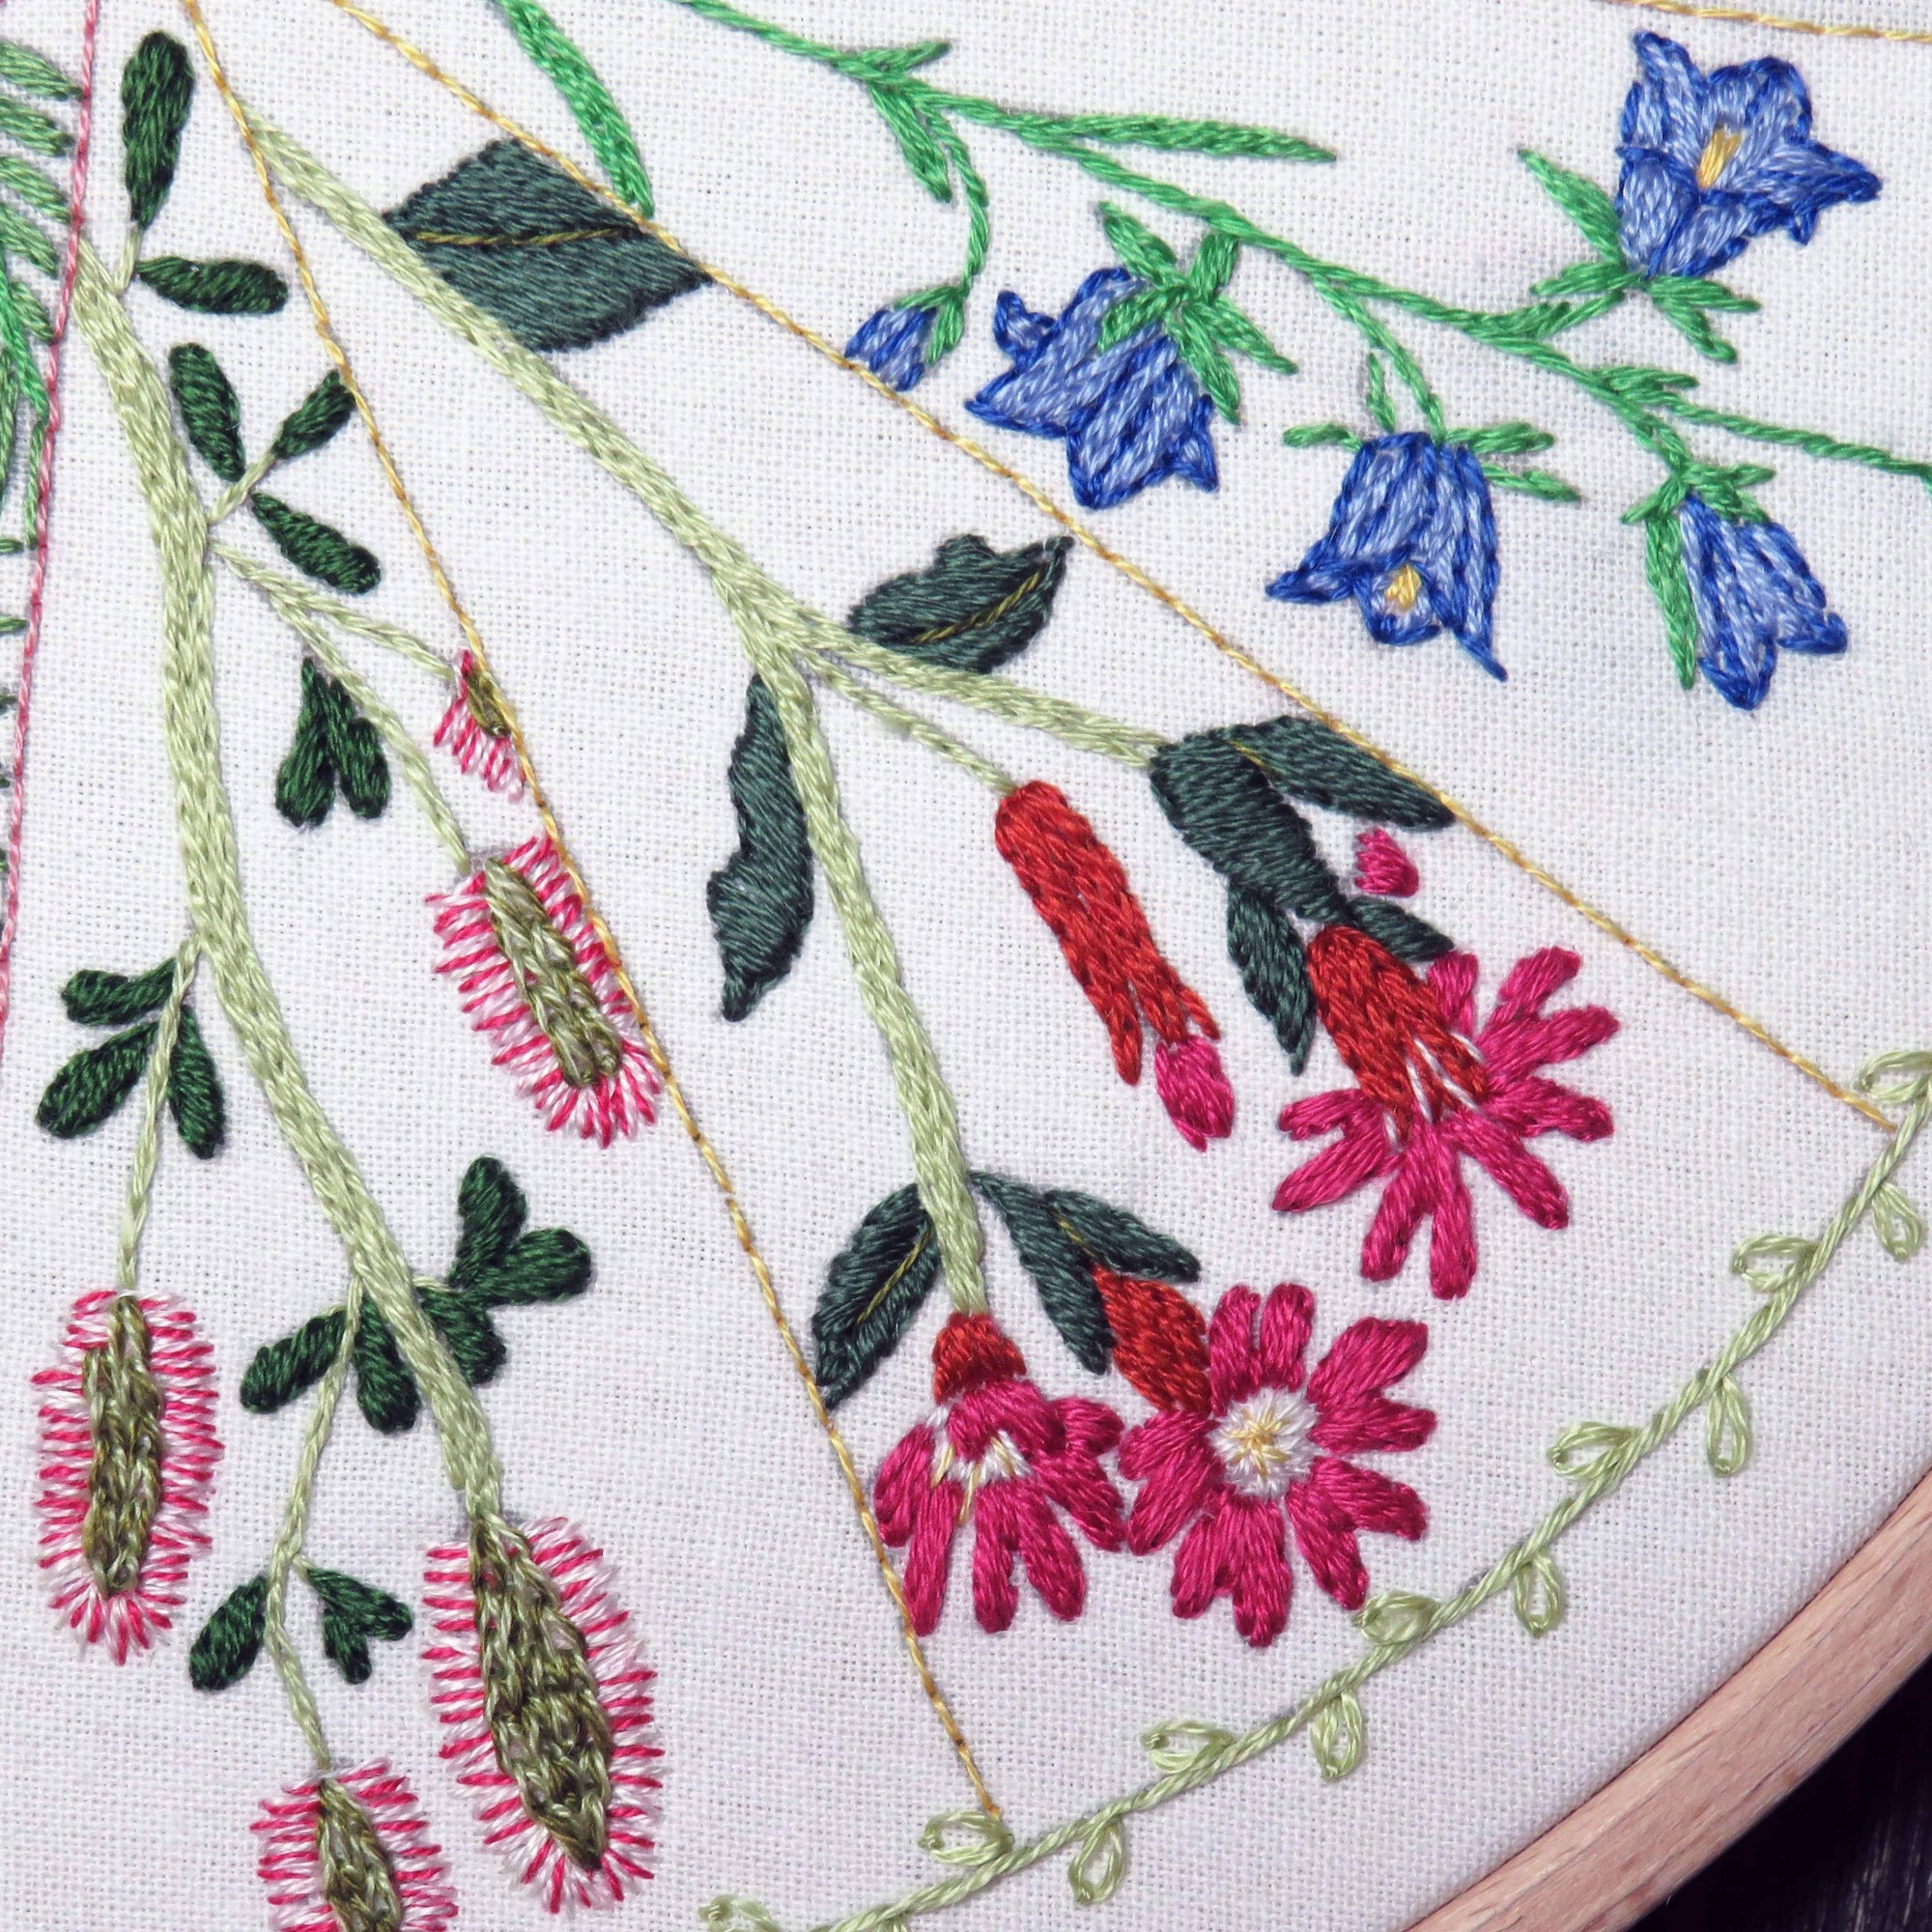 Nurge Embroidery Hoops are a wonderful high quality hoop – StitchDoodles